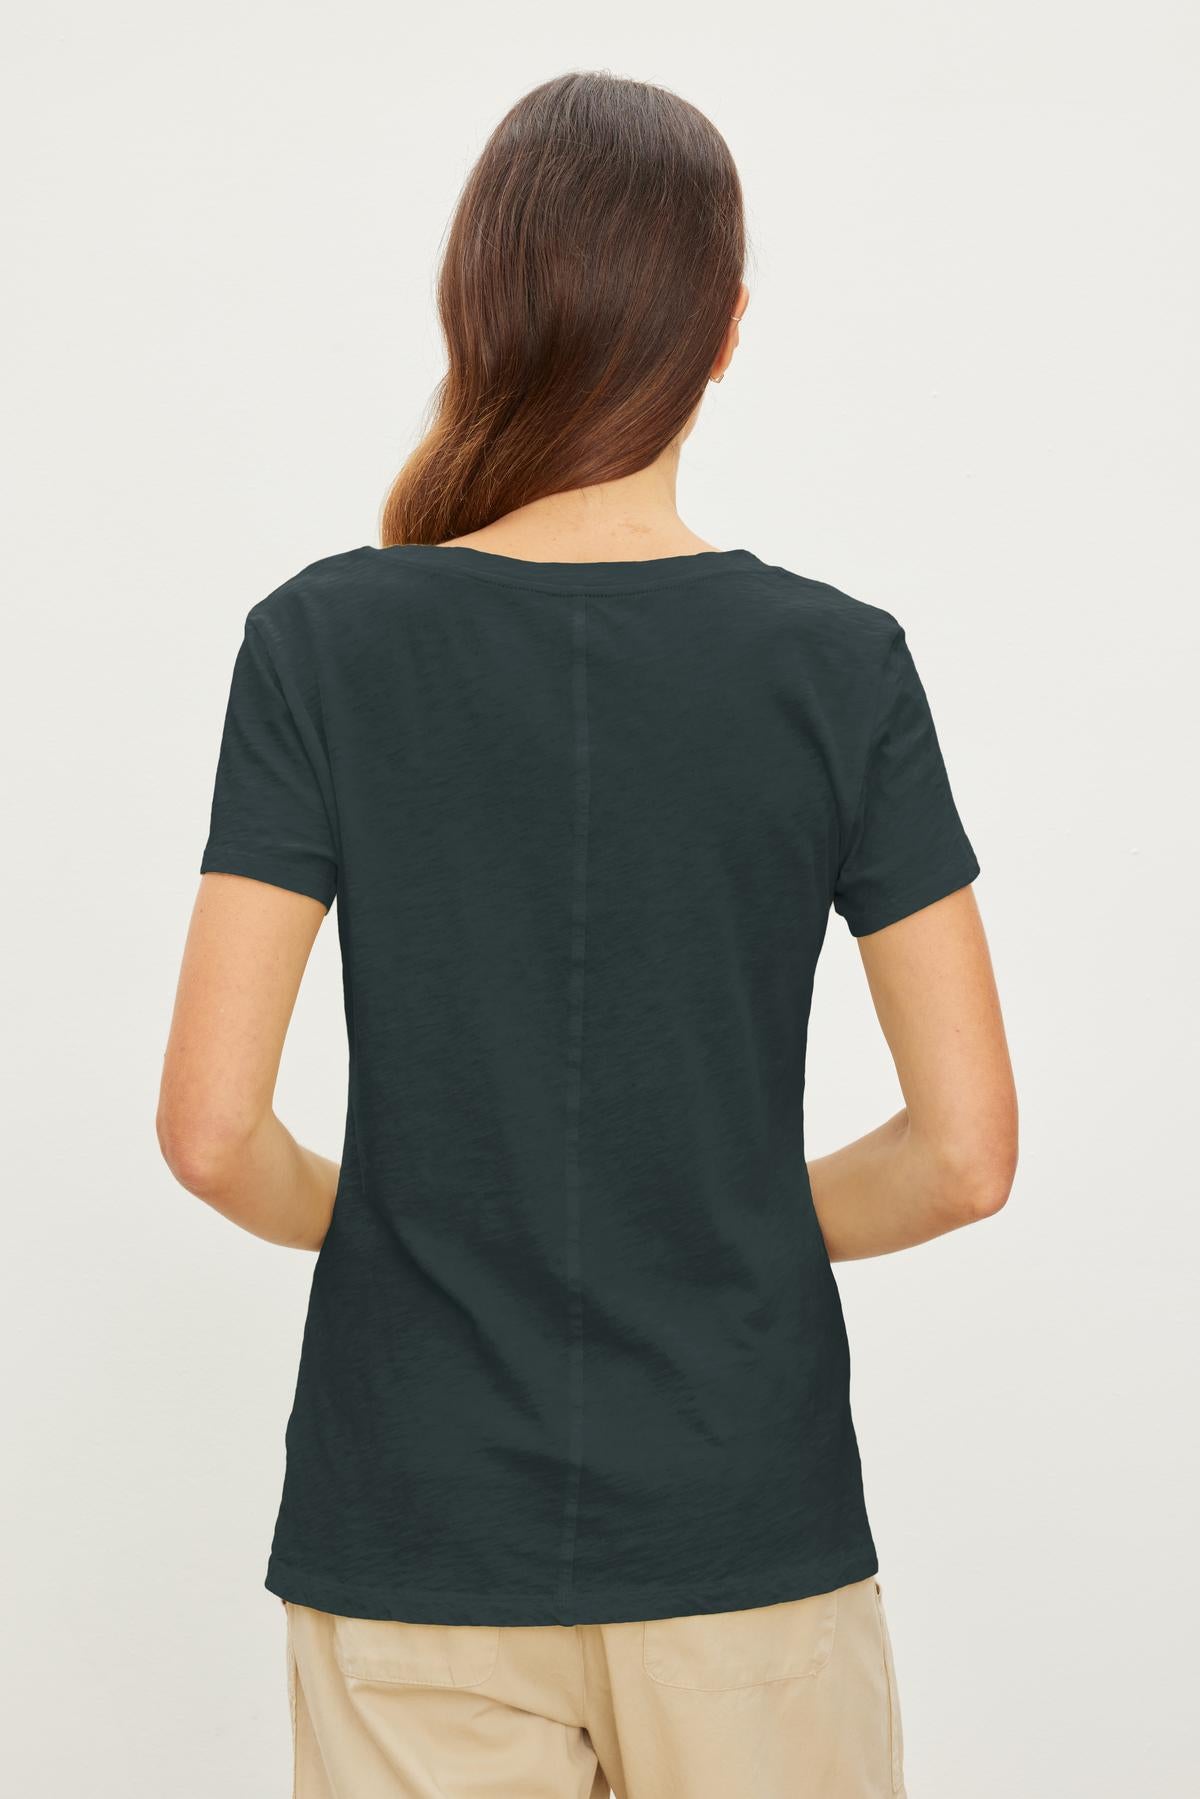   A person with long hair is shown from the back, wearing a dark green short-sleeved V-neck LILITH TEE by Velvet by Graham & Spencer and beige pants, standing against a plain white background. The shirt's cotton slub fabric adds a touch of luxurious softness. 